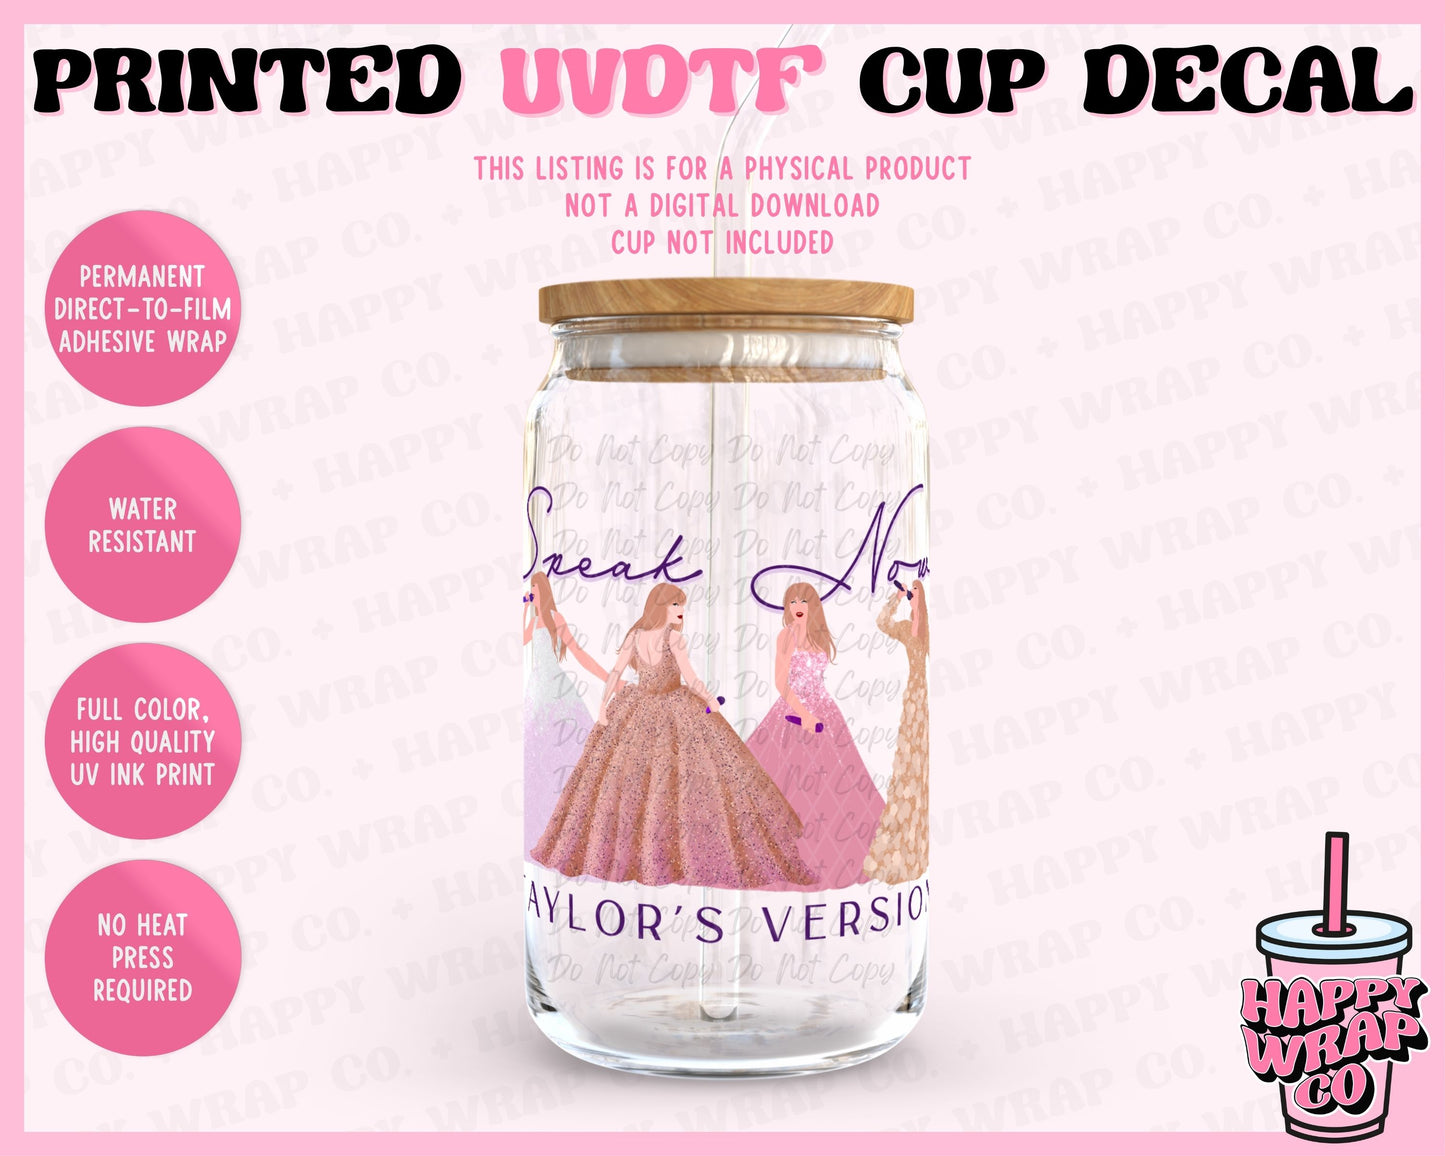 Speak Now TV - UVDTF Cup Decal (Ready-to-Ship)